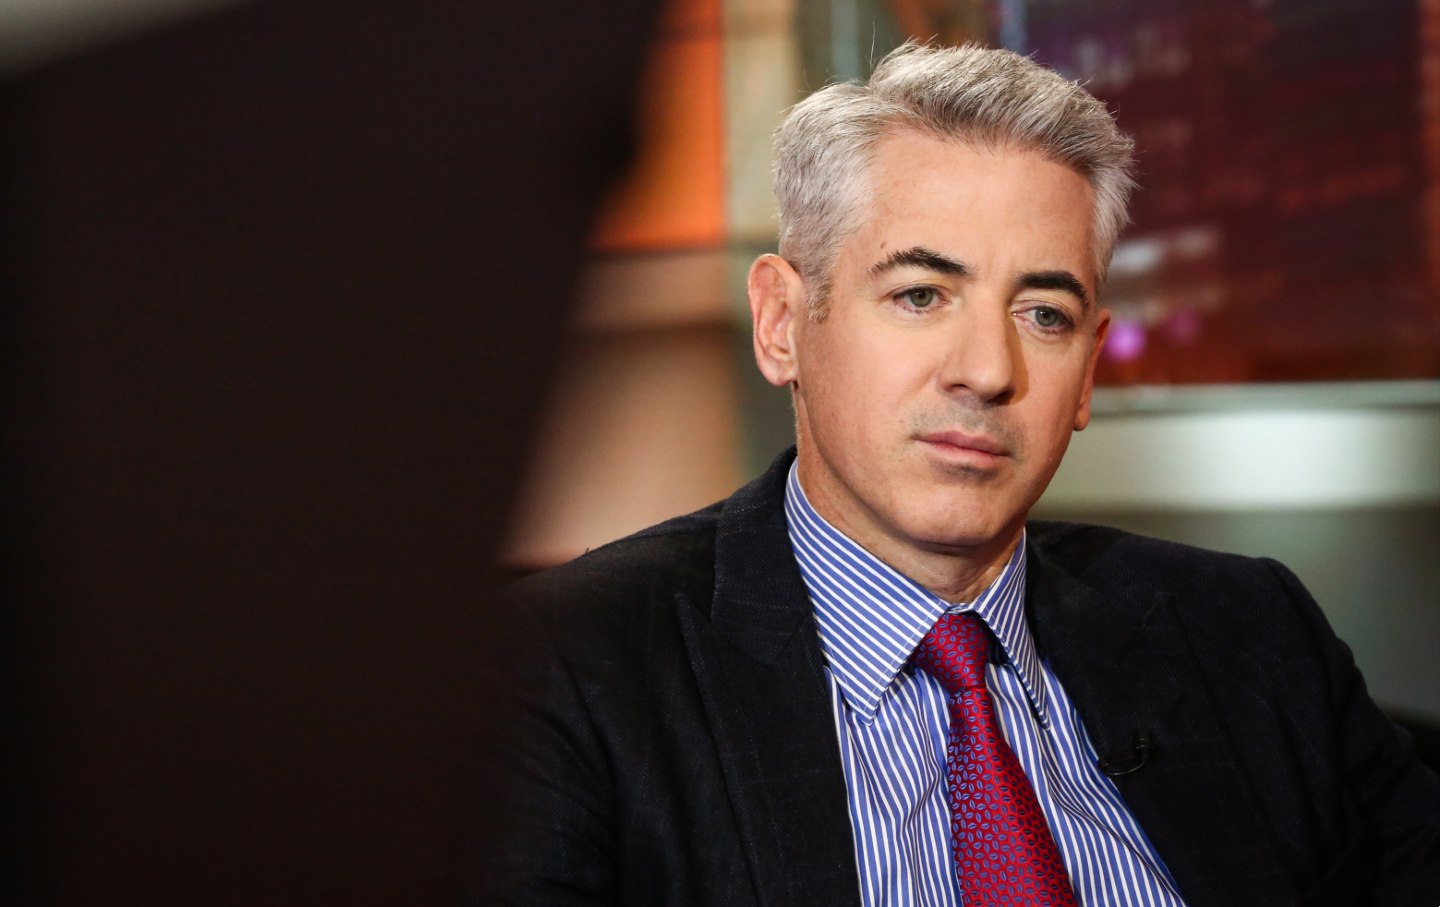 Bill Ackman, chief executive officer of Pershing Square Capital Management LP, listens during a Bloomberg Television interview in New York City, on Wednesday, November 1, 2017.